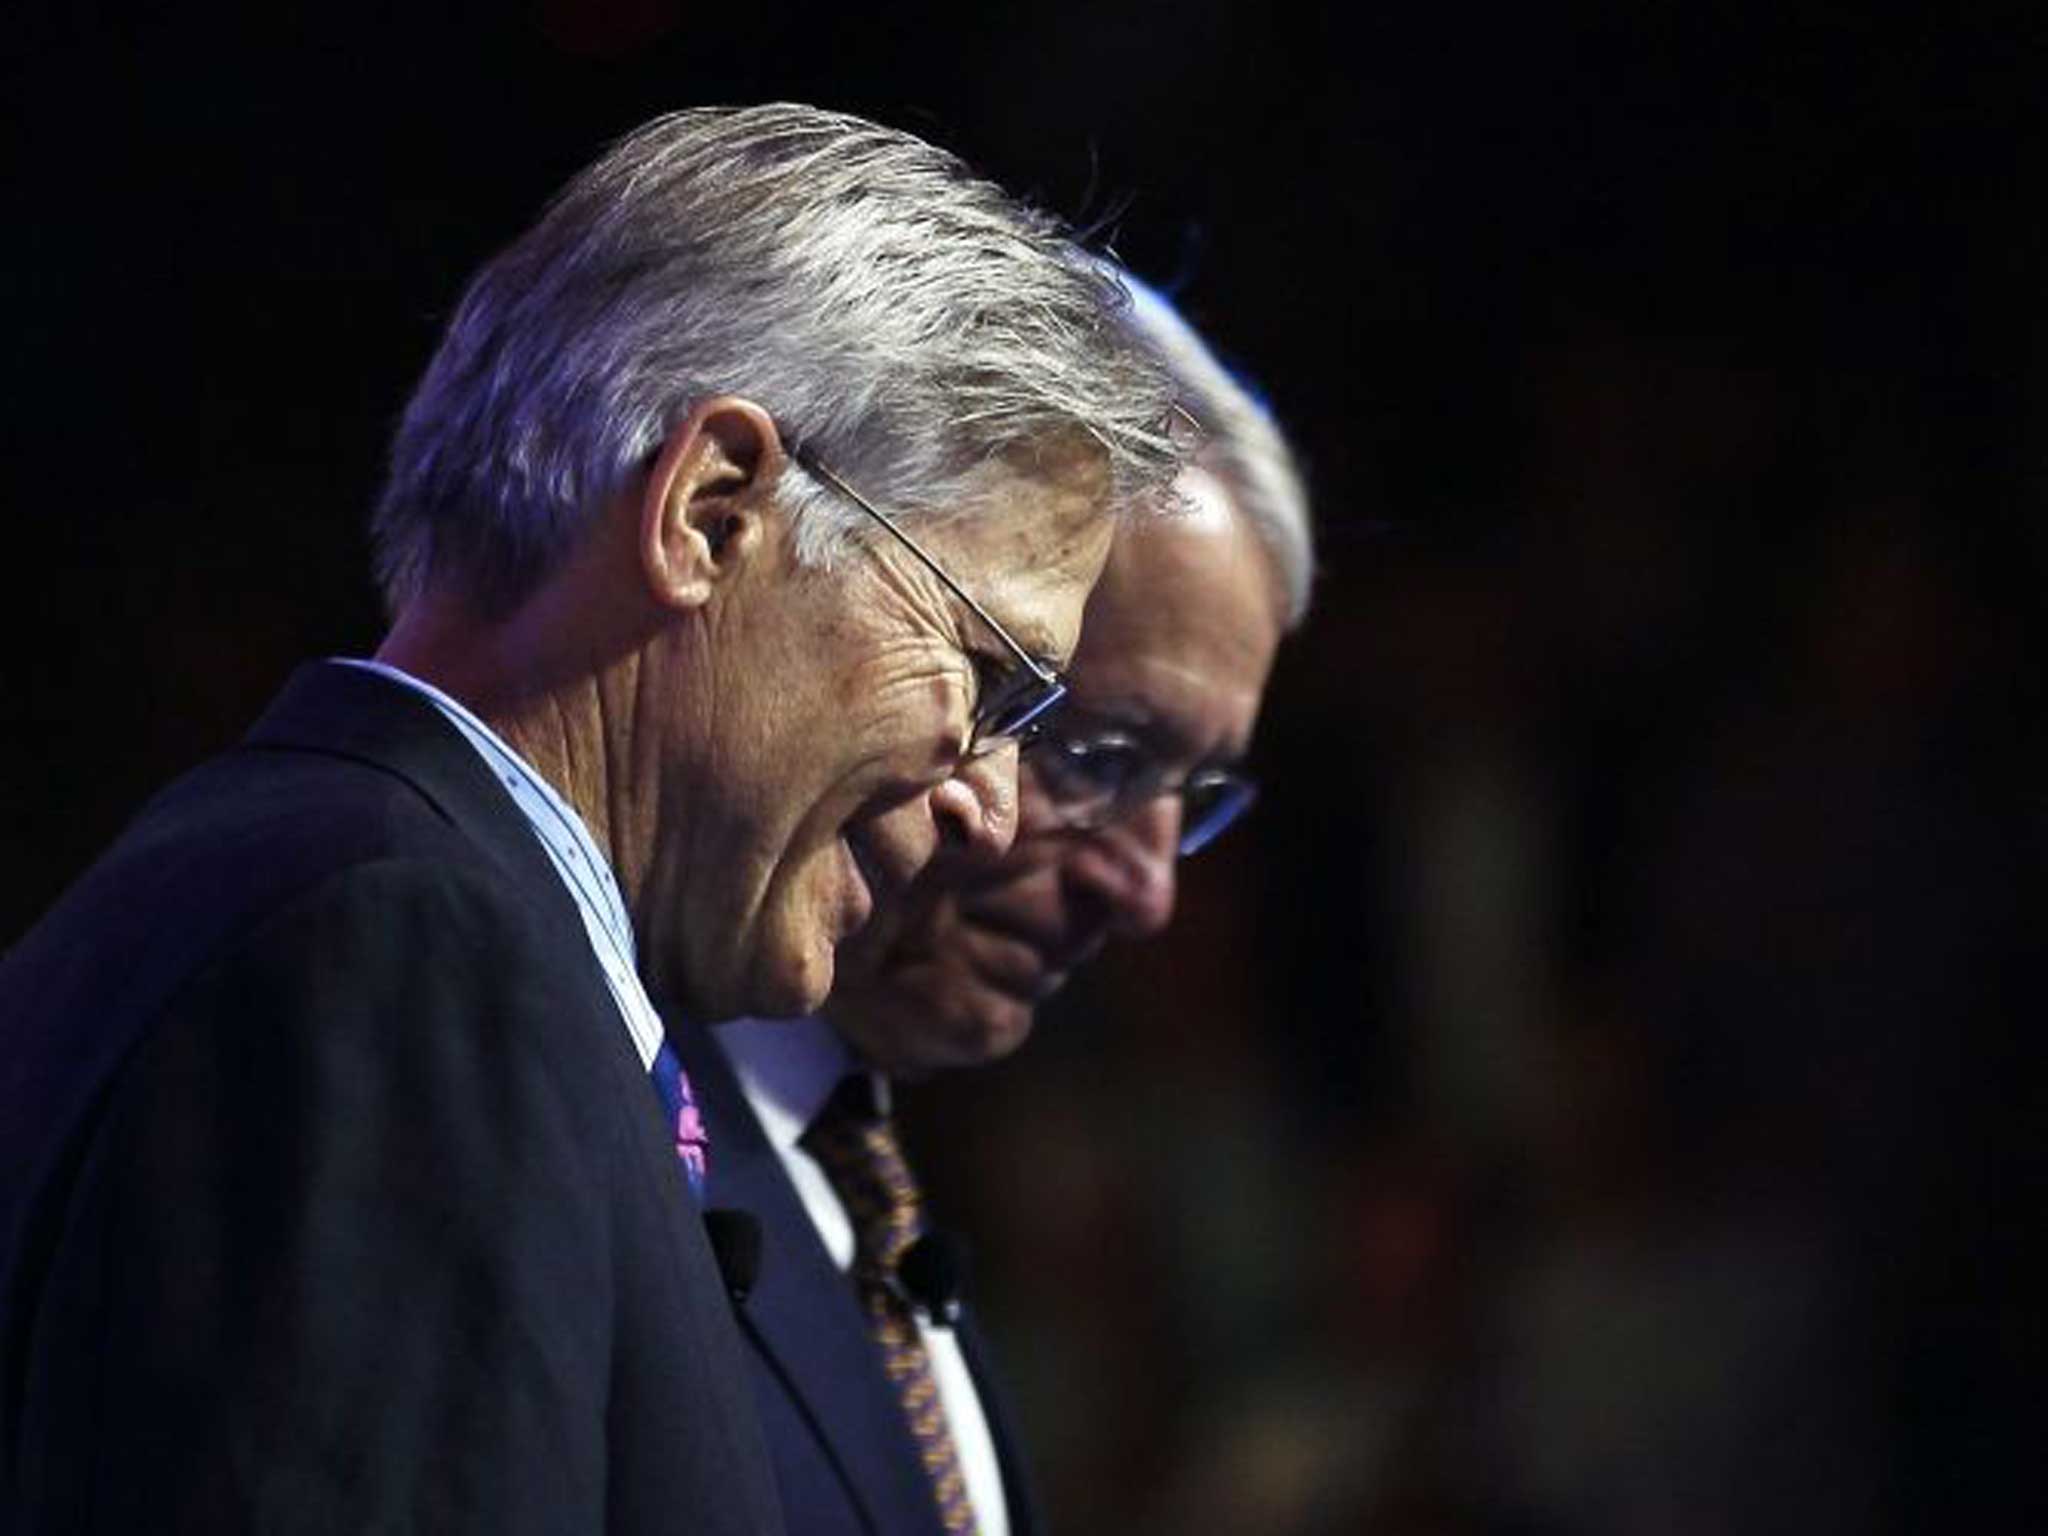 Two of the heirs to the Walmart fortune, Jim and Rob Walton